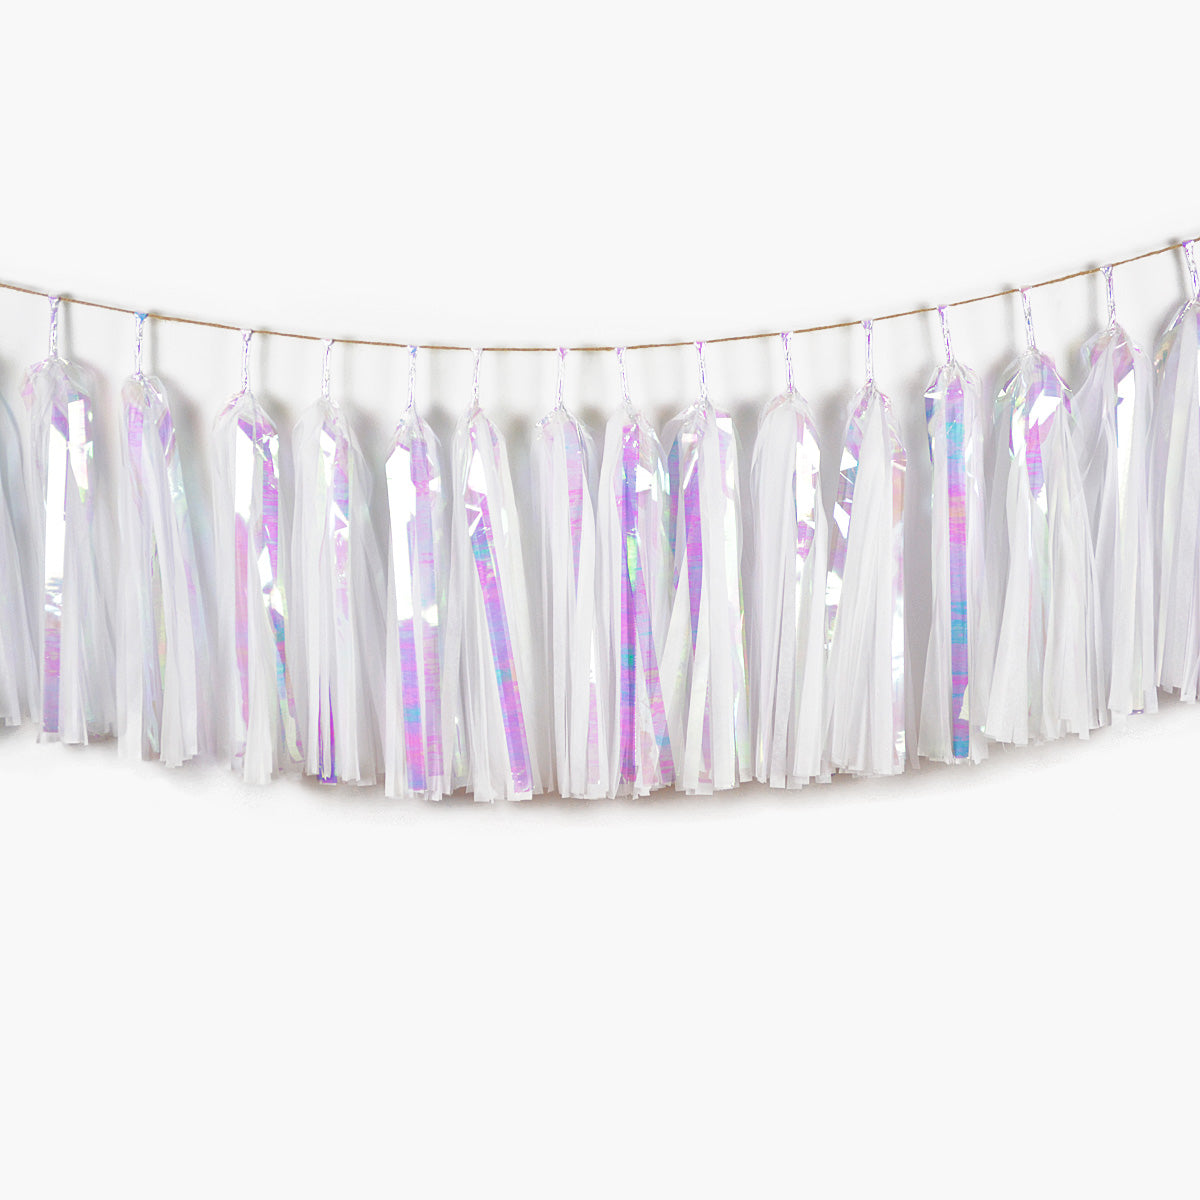 Iridescent Snow Tassel Garland - Winter Wonderland Party Decorations Christmas Snowflake Wall Hanging Backdrop Let it snow